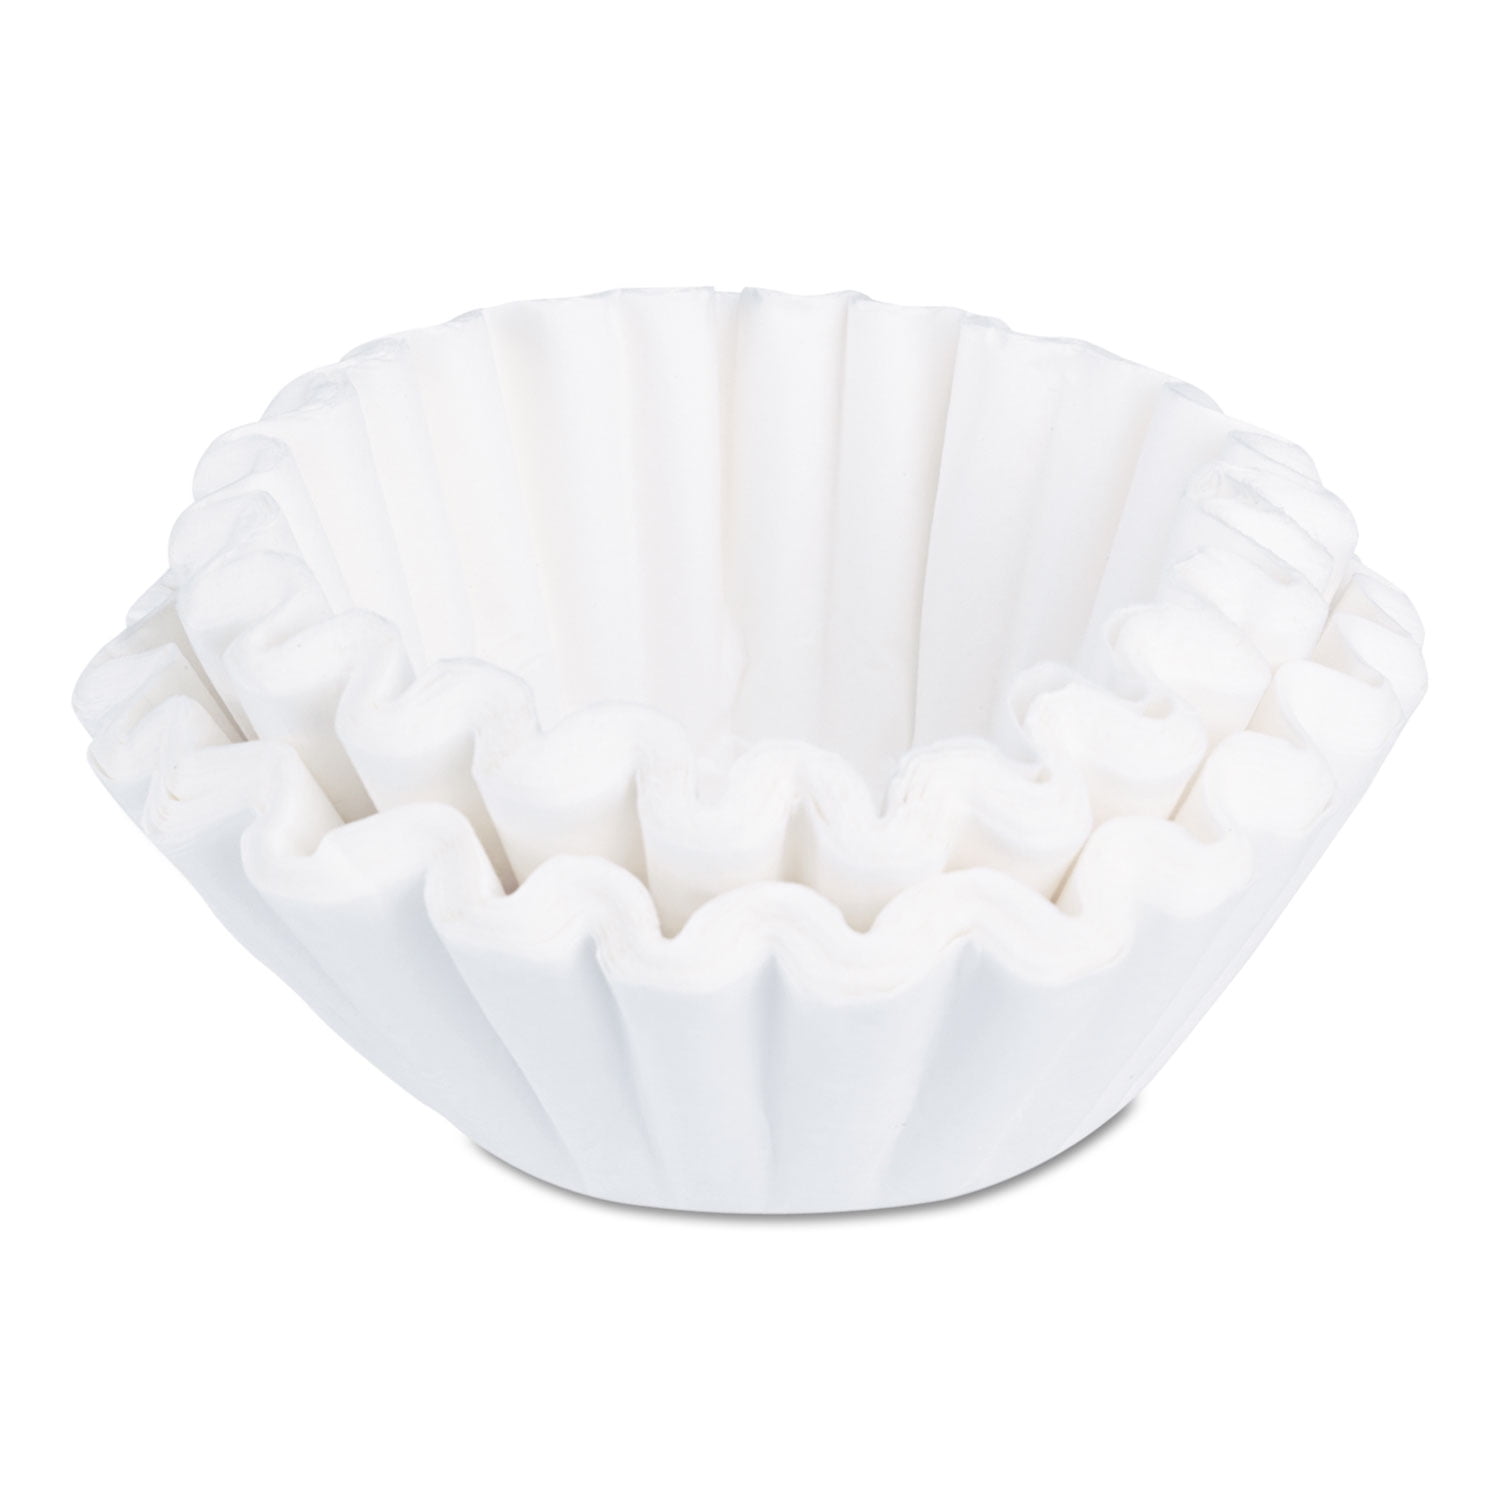 - Commercial Bunn-Style Brew-Rite Coffee Filters 12 Cup 1,000 count   